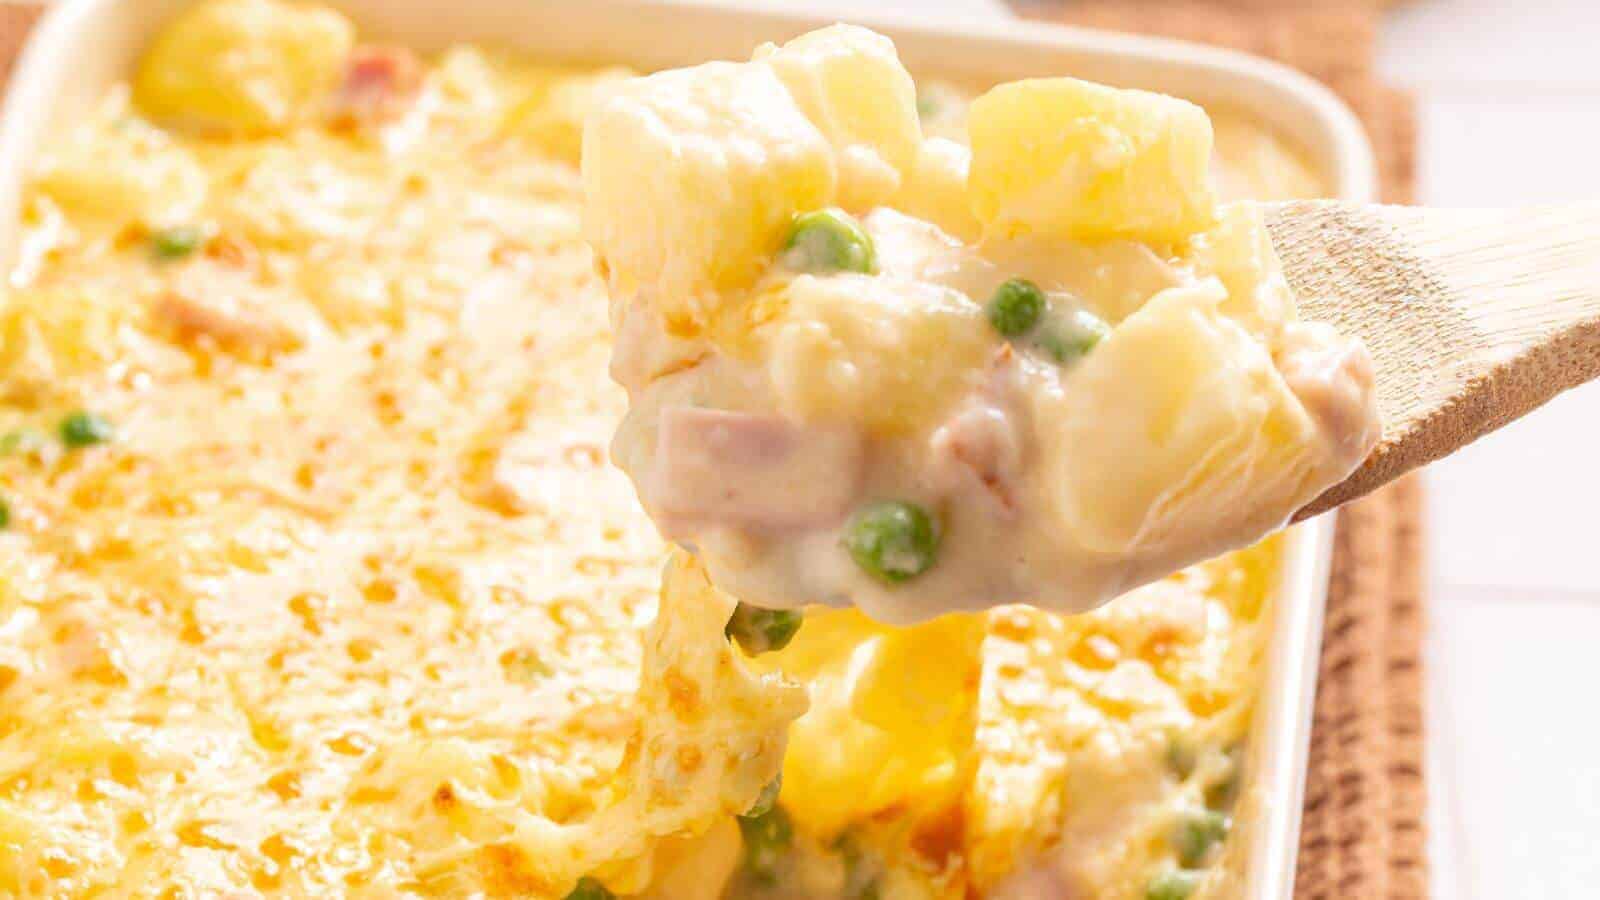 A close-up image of a spoonful of creamy ham and potato casserole with peas and cheese, lifted from a baking dish.